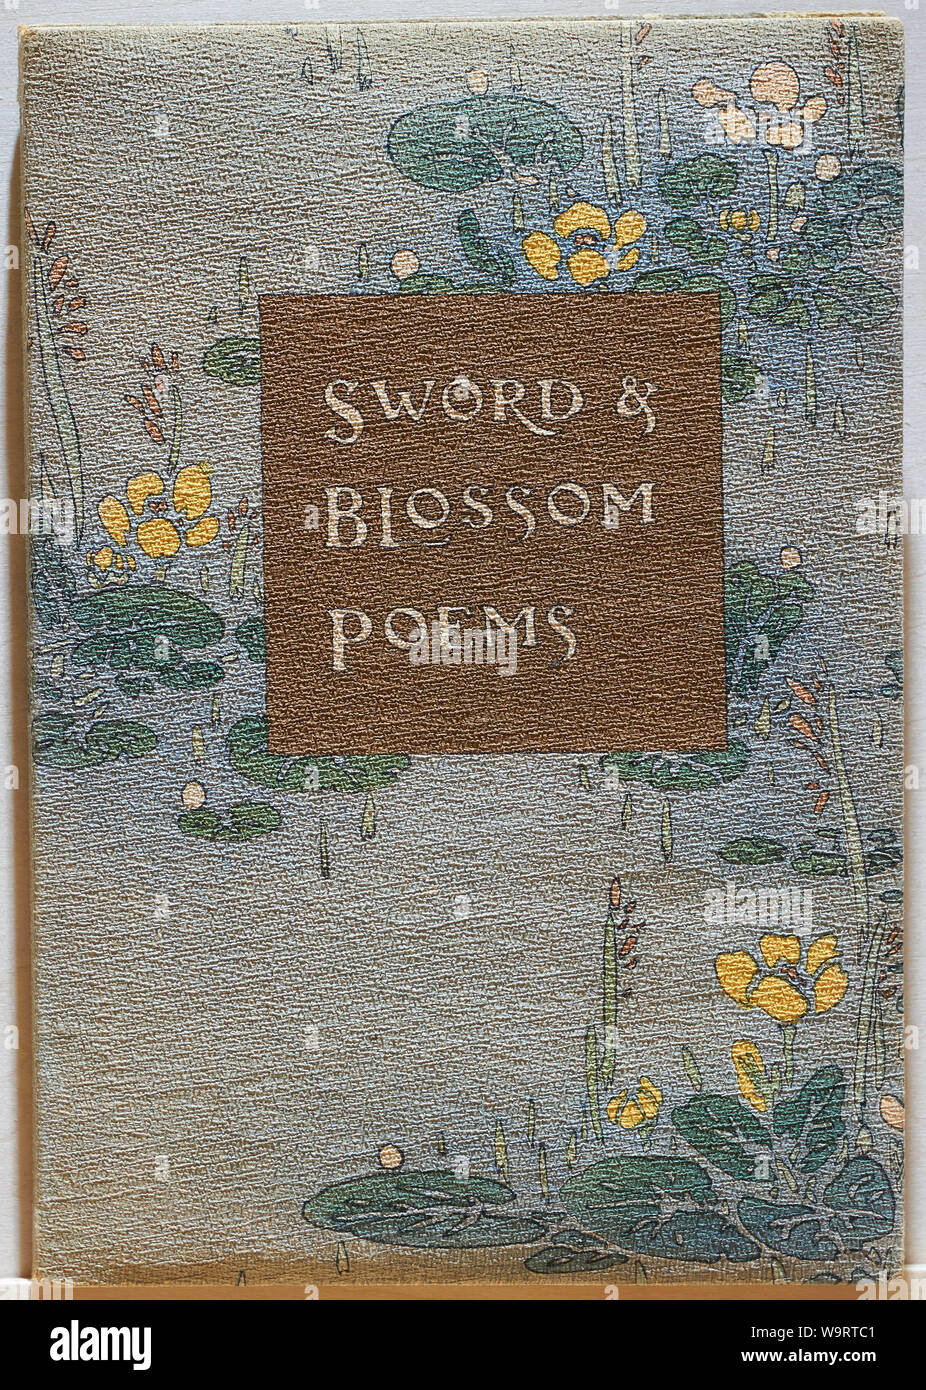 Japanese woodblock printed Sword & Blossom Poems book published by Hasegawa in the early 1900s (20th century). Stock Photo